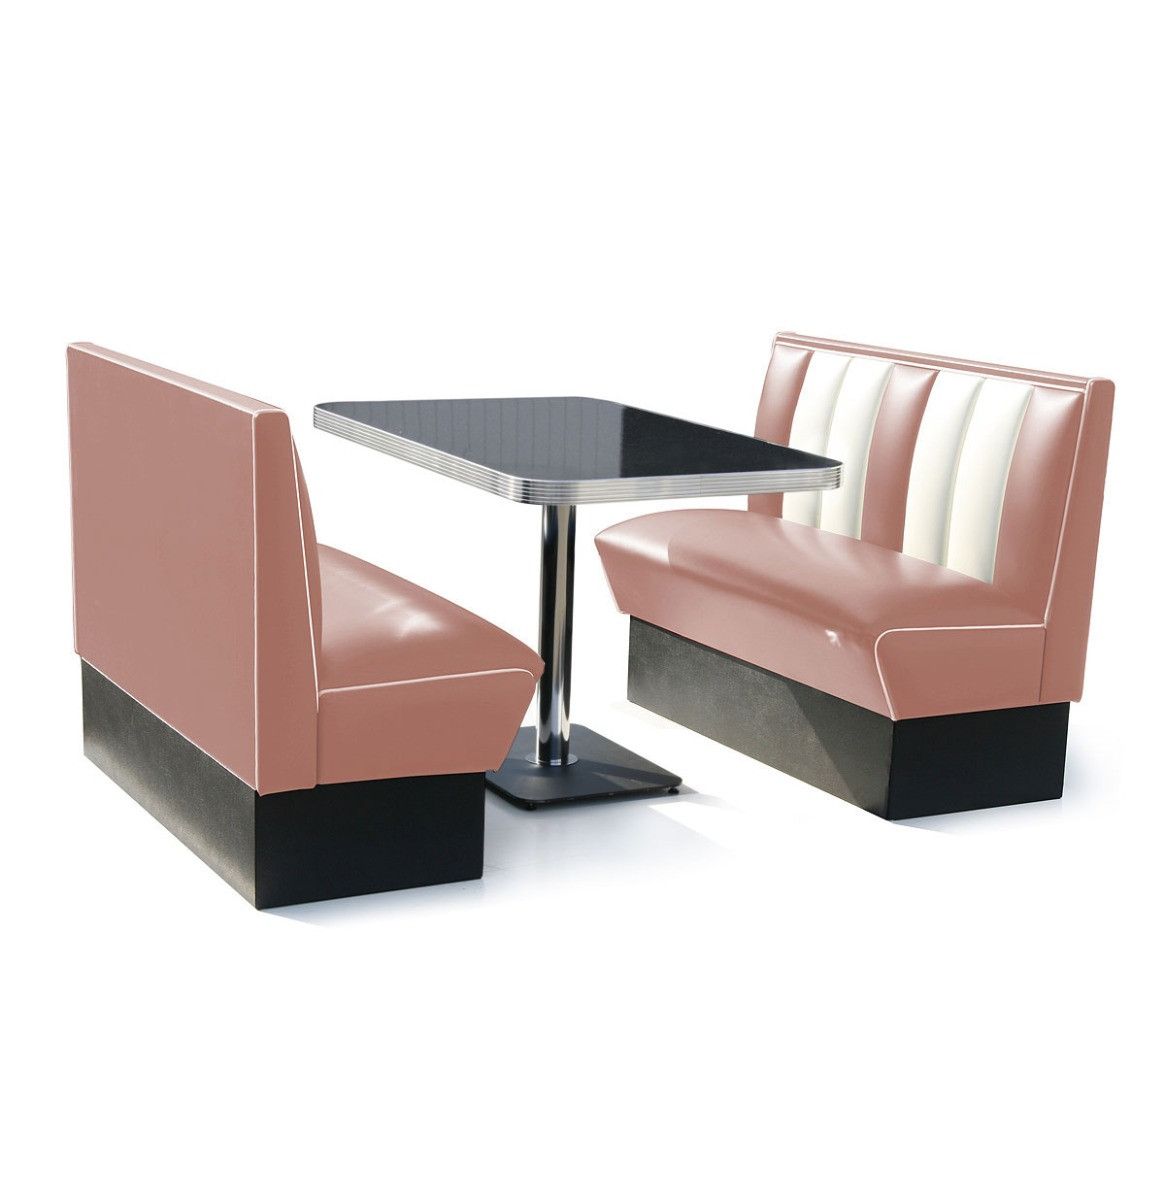 2 x Classic Dinerbooth Dusty Rose + Tafel